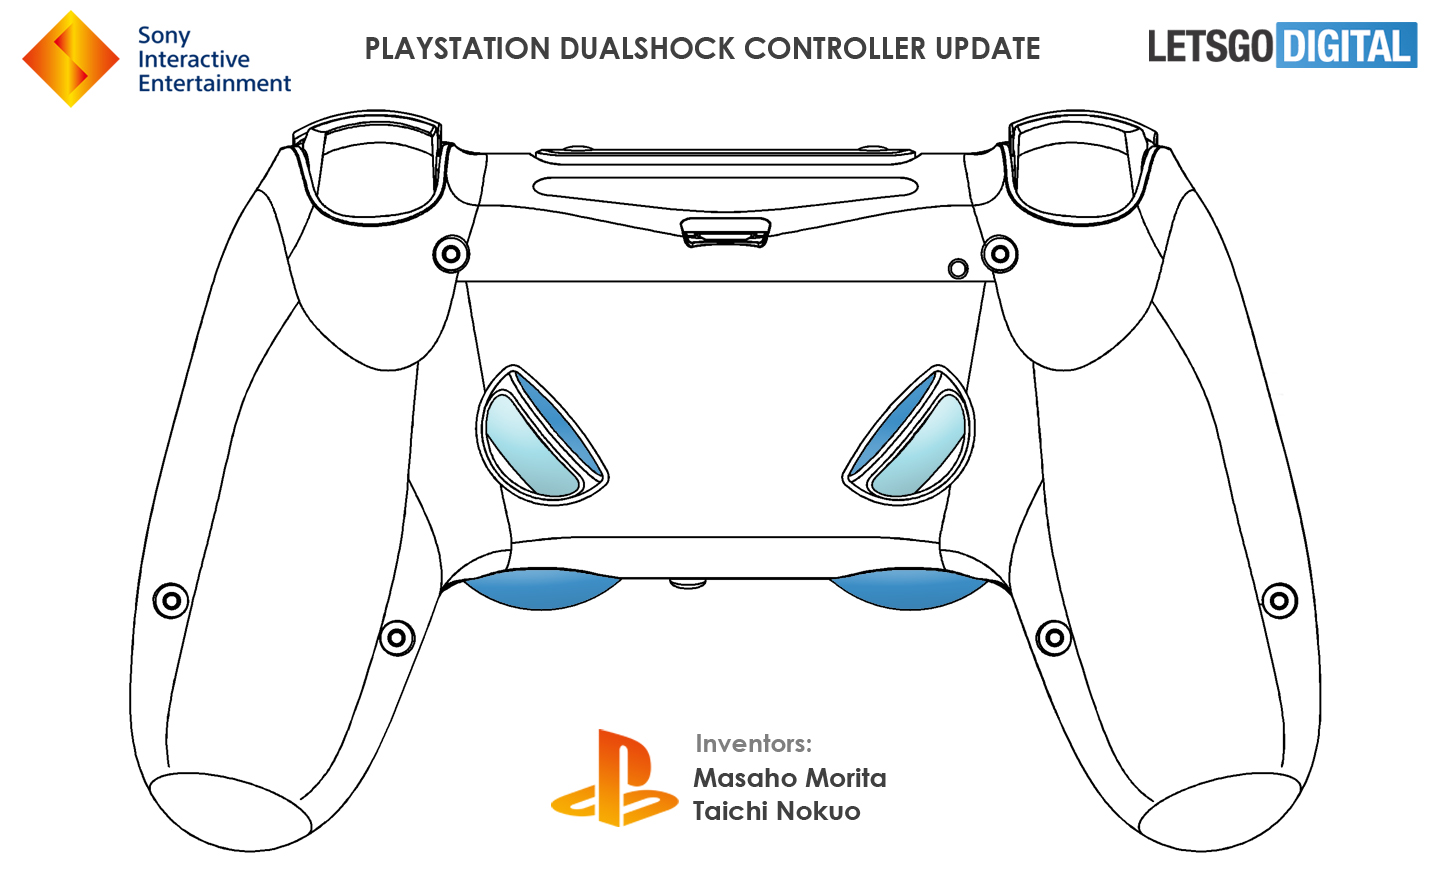 ps5 with extra controller